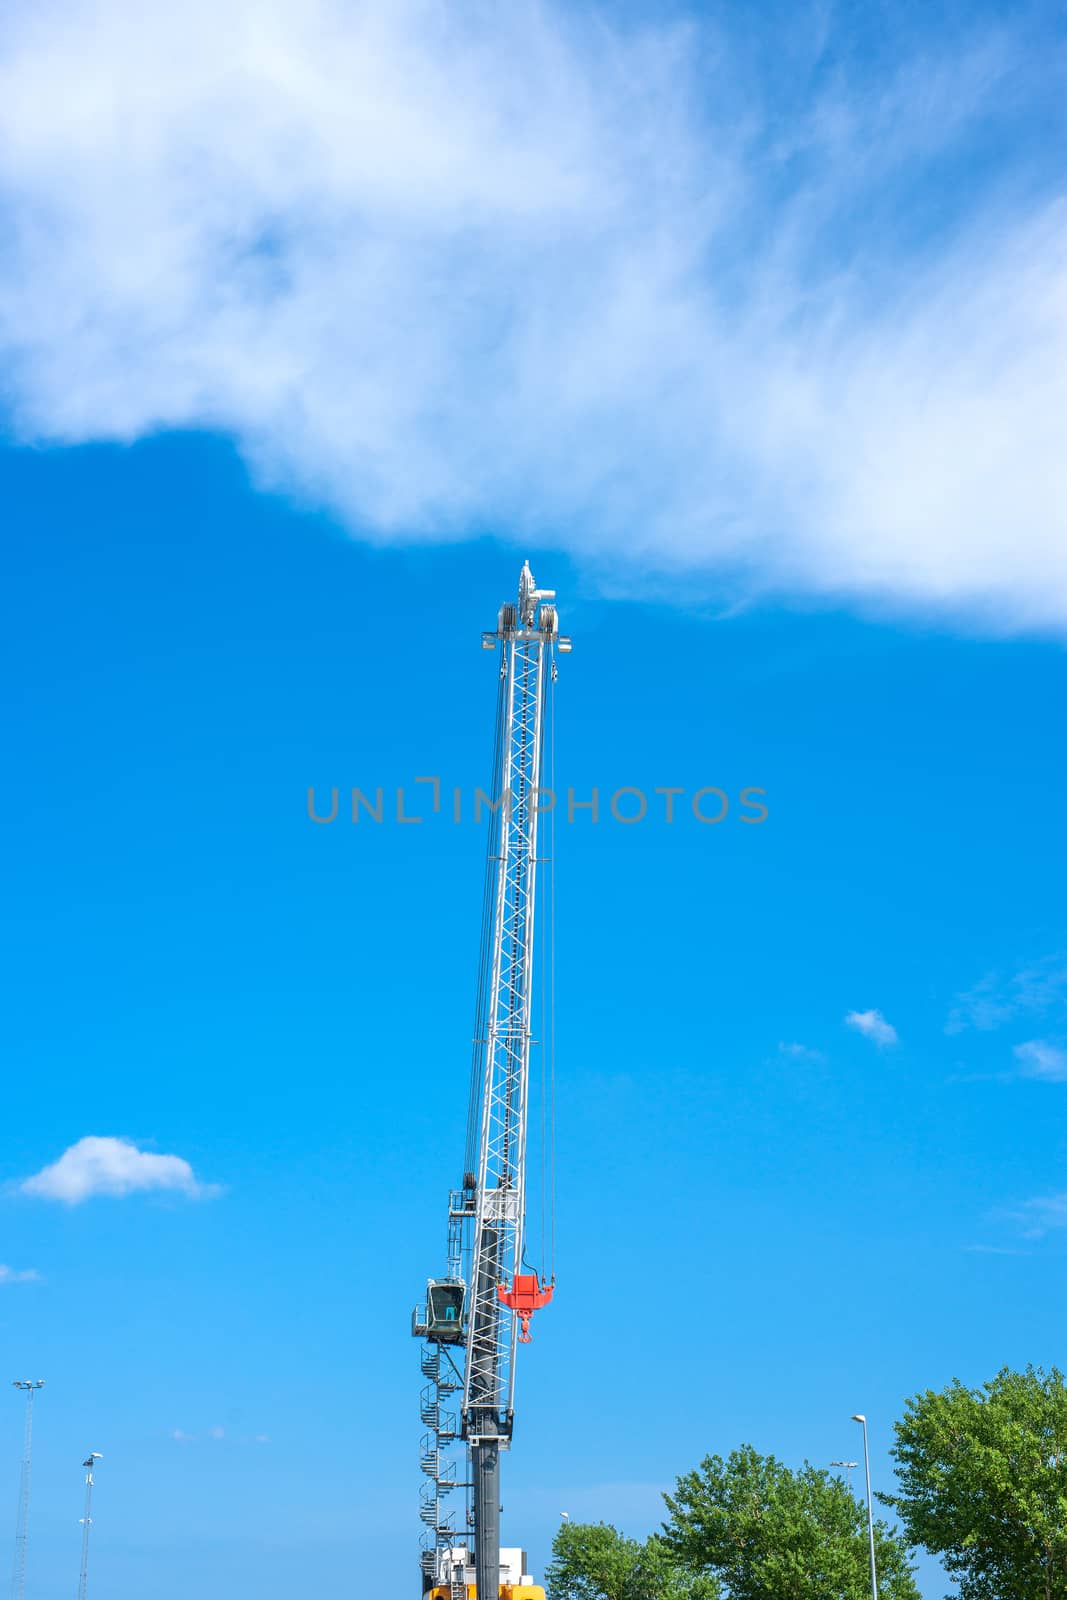 Large crane machinery in daylight and blue sky